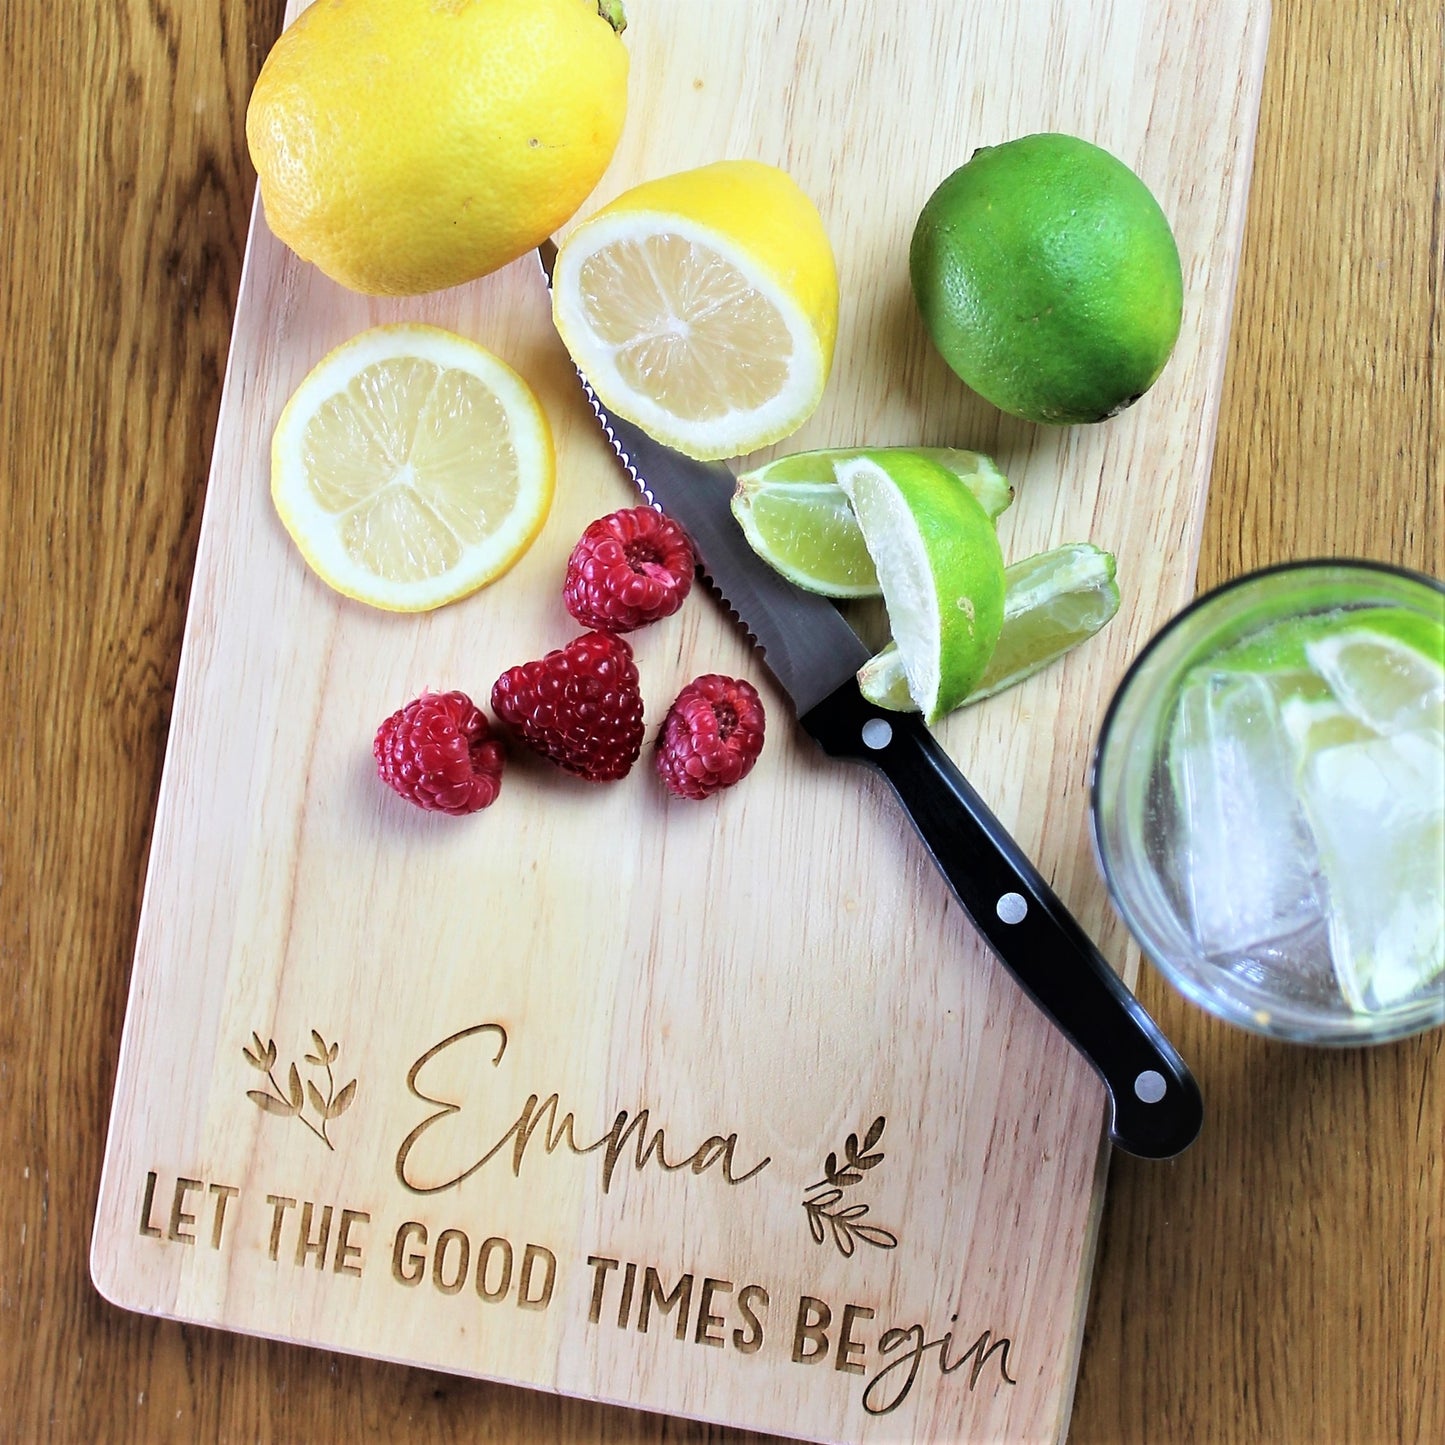 let the good times begin - wooden gin serving board 